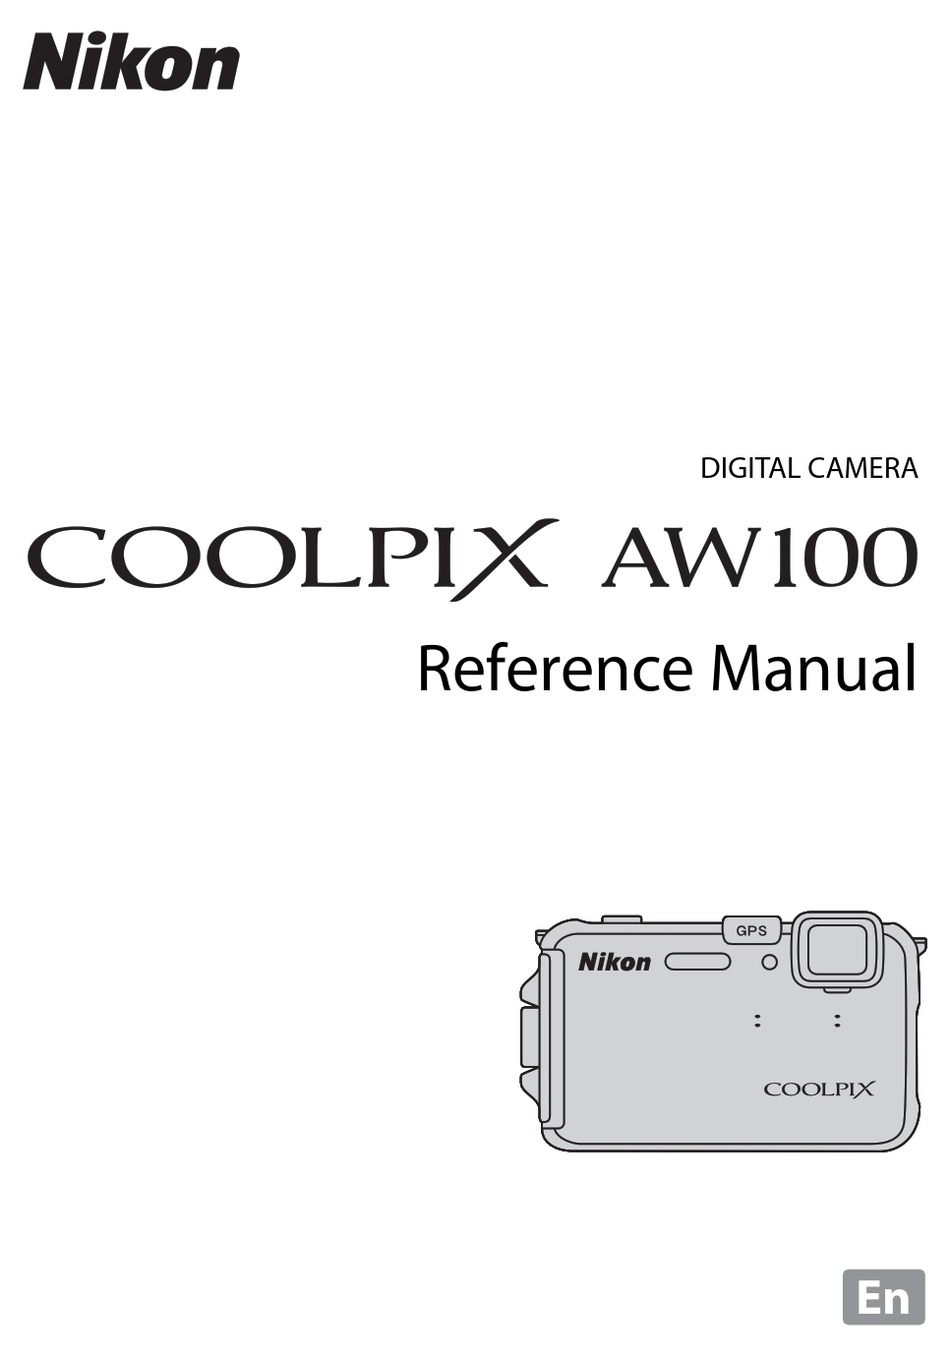 NIKON COOLPIX AW110 CAMERA PRINTED INSTRUCTION MANUAL USER GUIDE 252 PAGES 